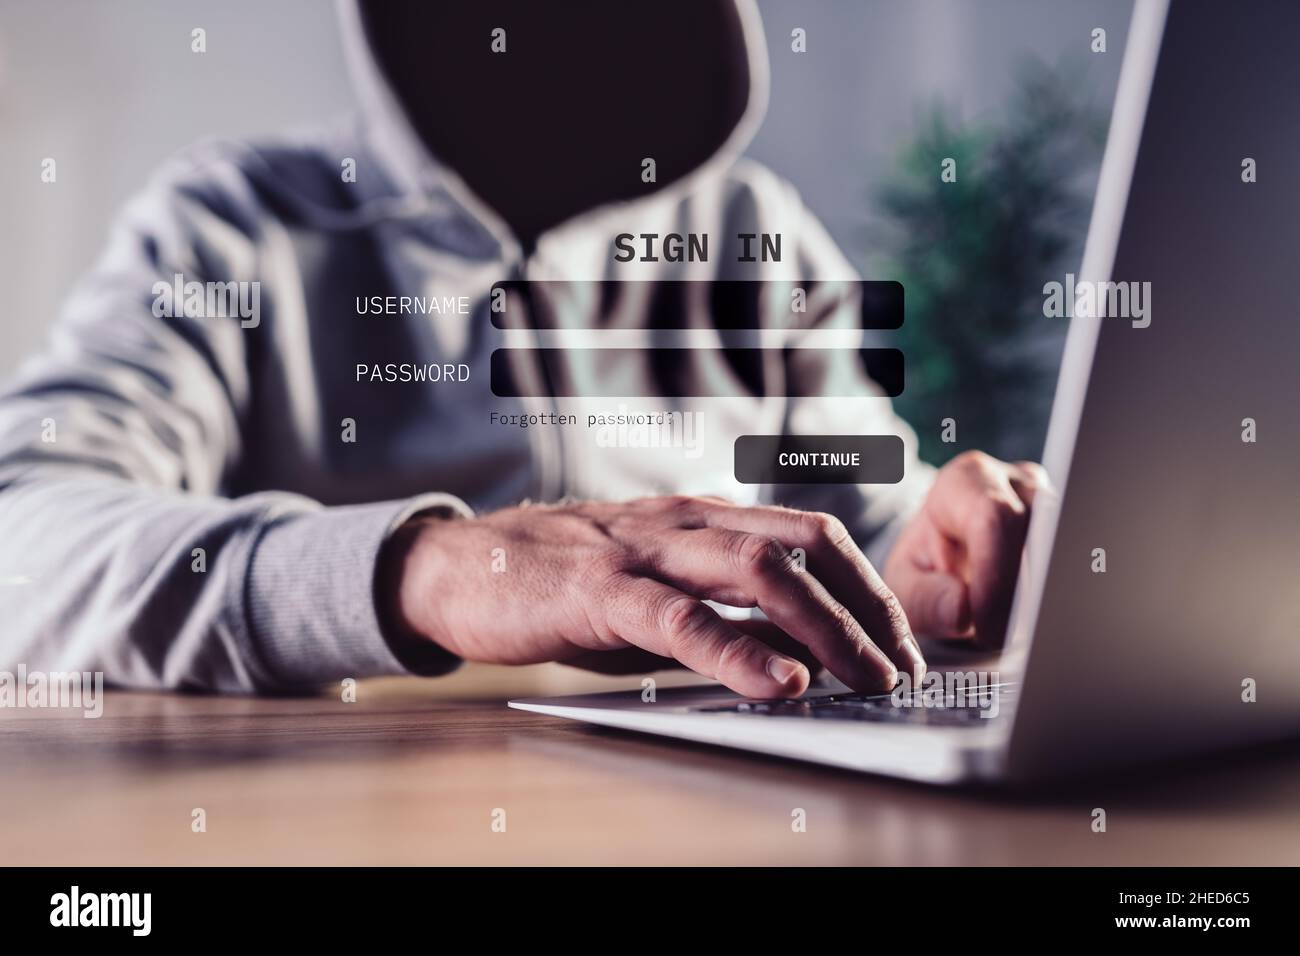 Phishing attack concept, computer hacker using fake website to steal login credentials, selective focus Stock Photo